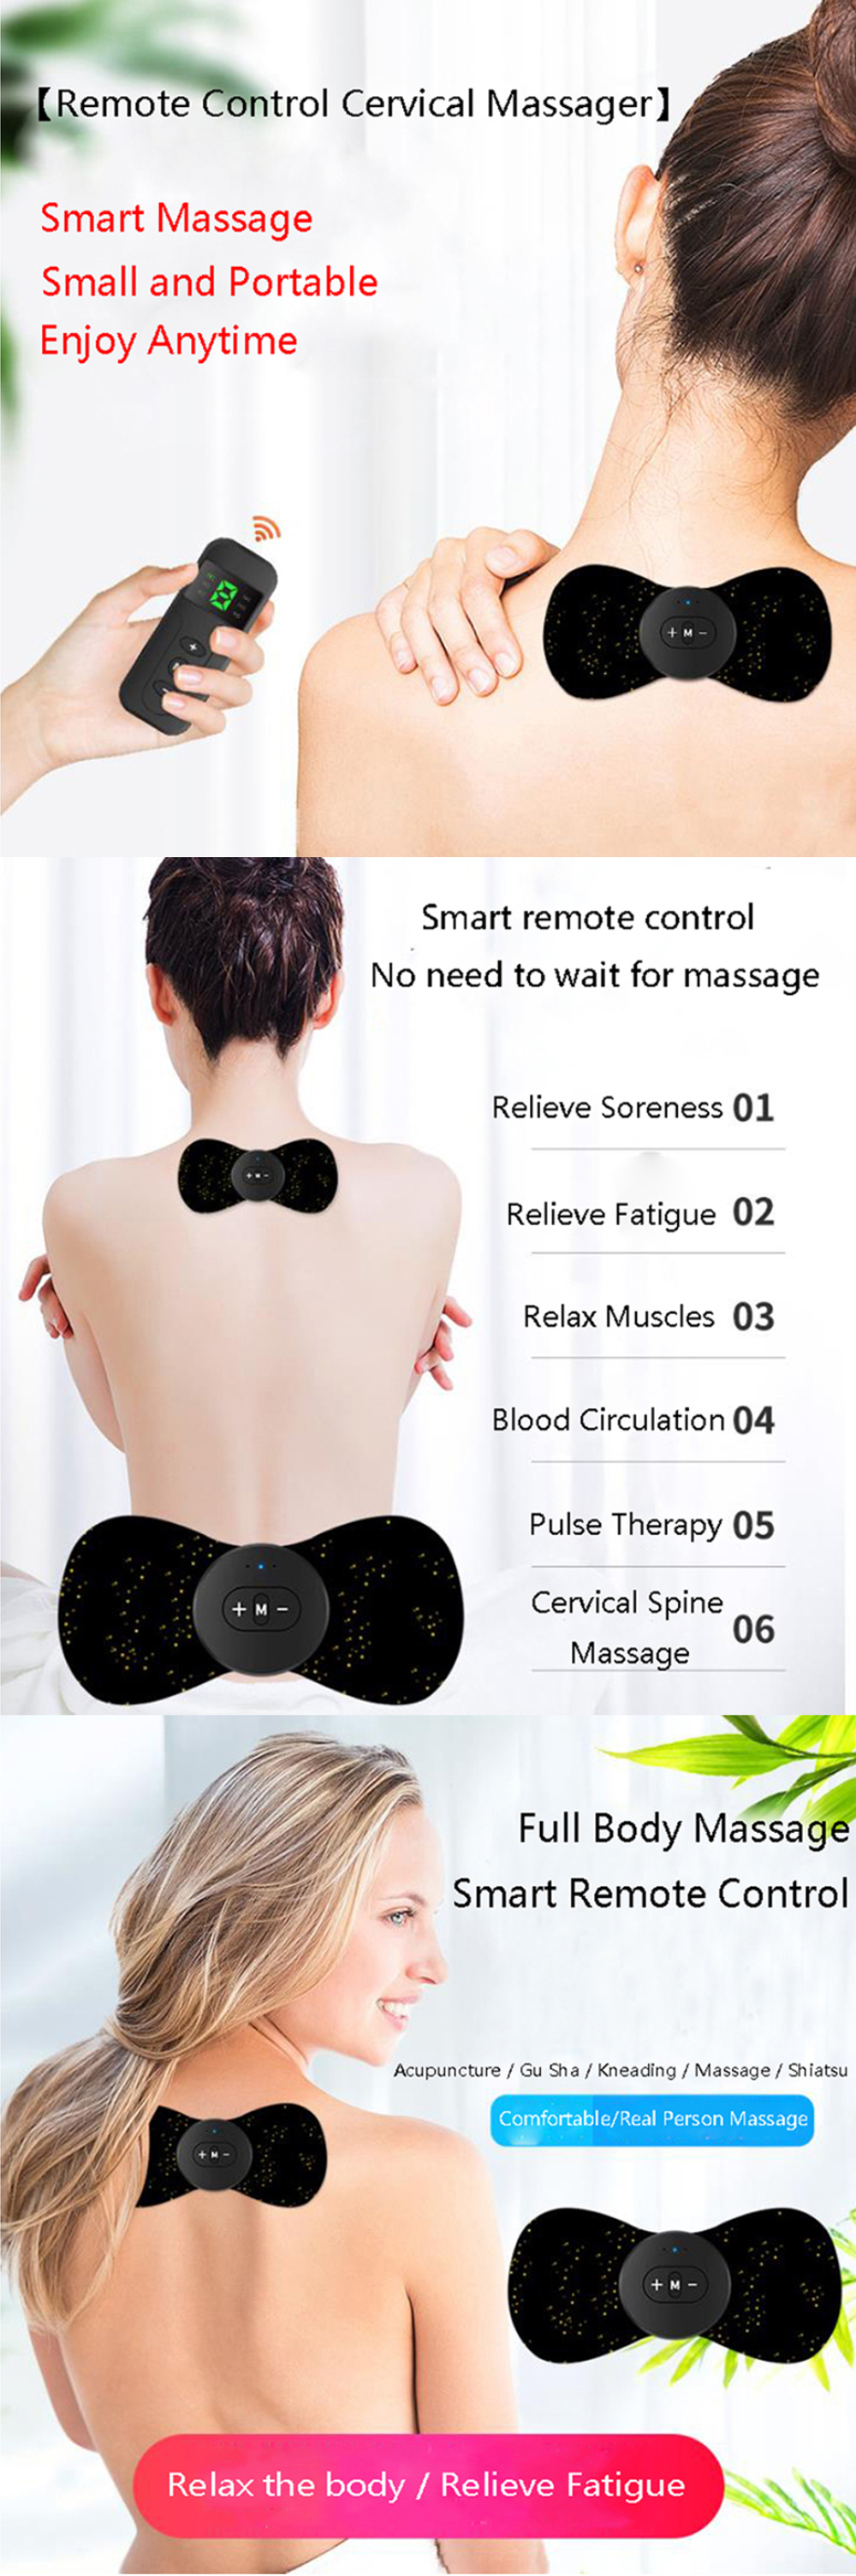 DG3-Electric-Cervical-Massager-Patch-Remote-Control--Vibration-Muscle-Relaxation-Tool-Massager-Recha-1780537-1